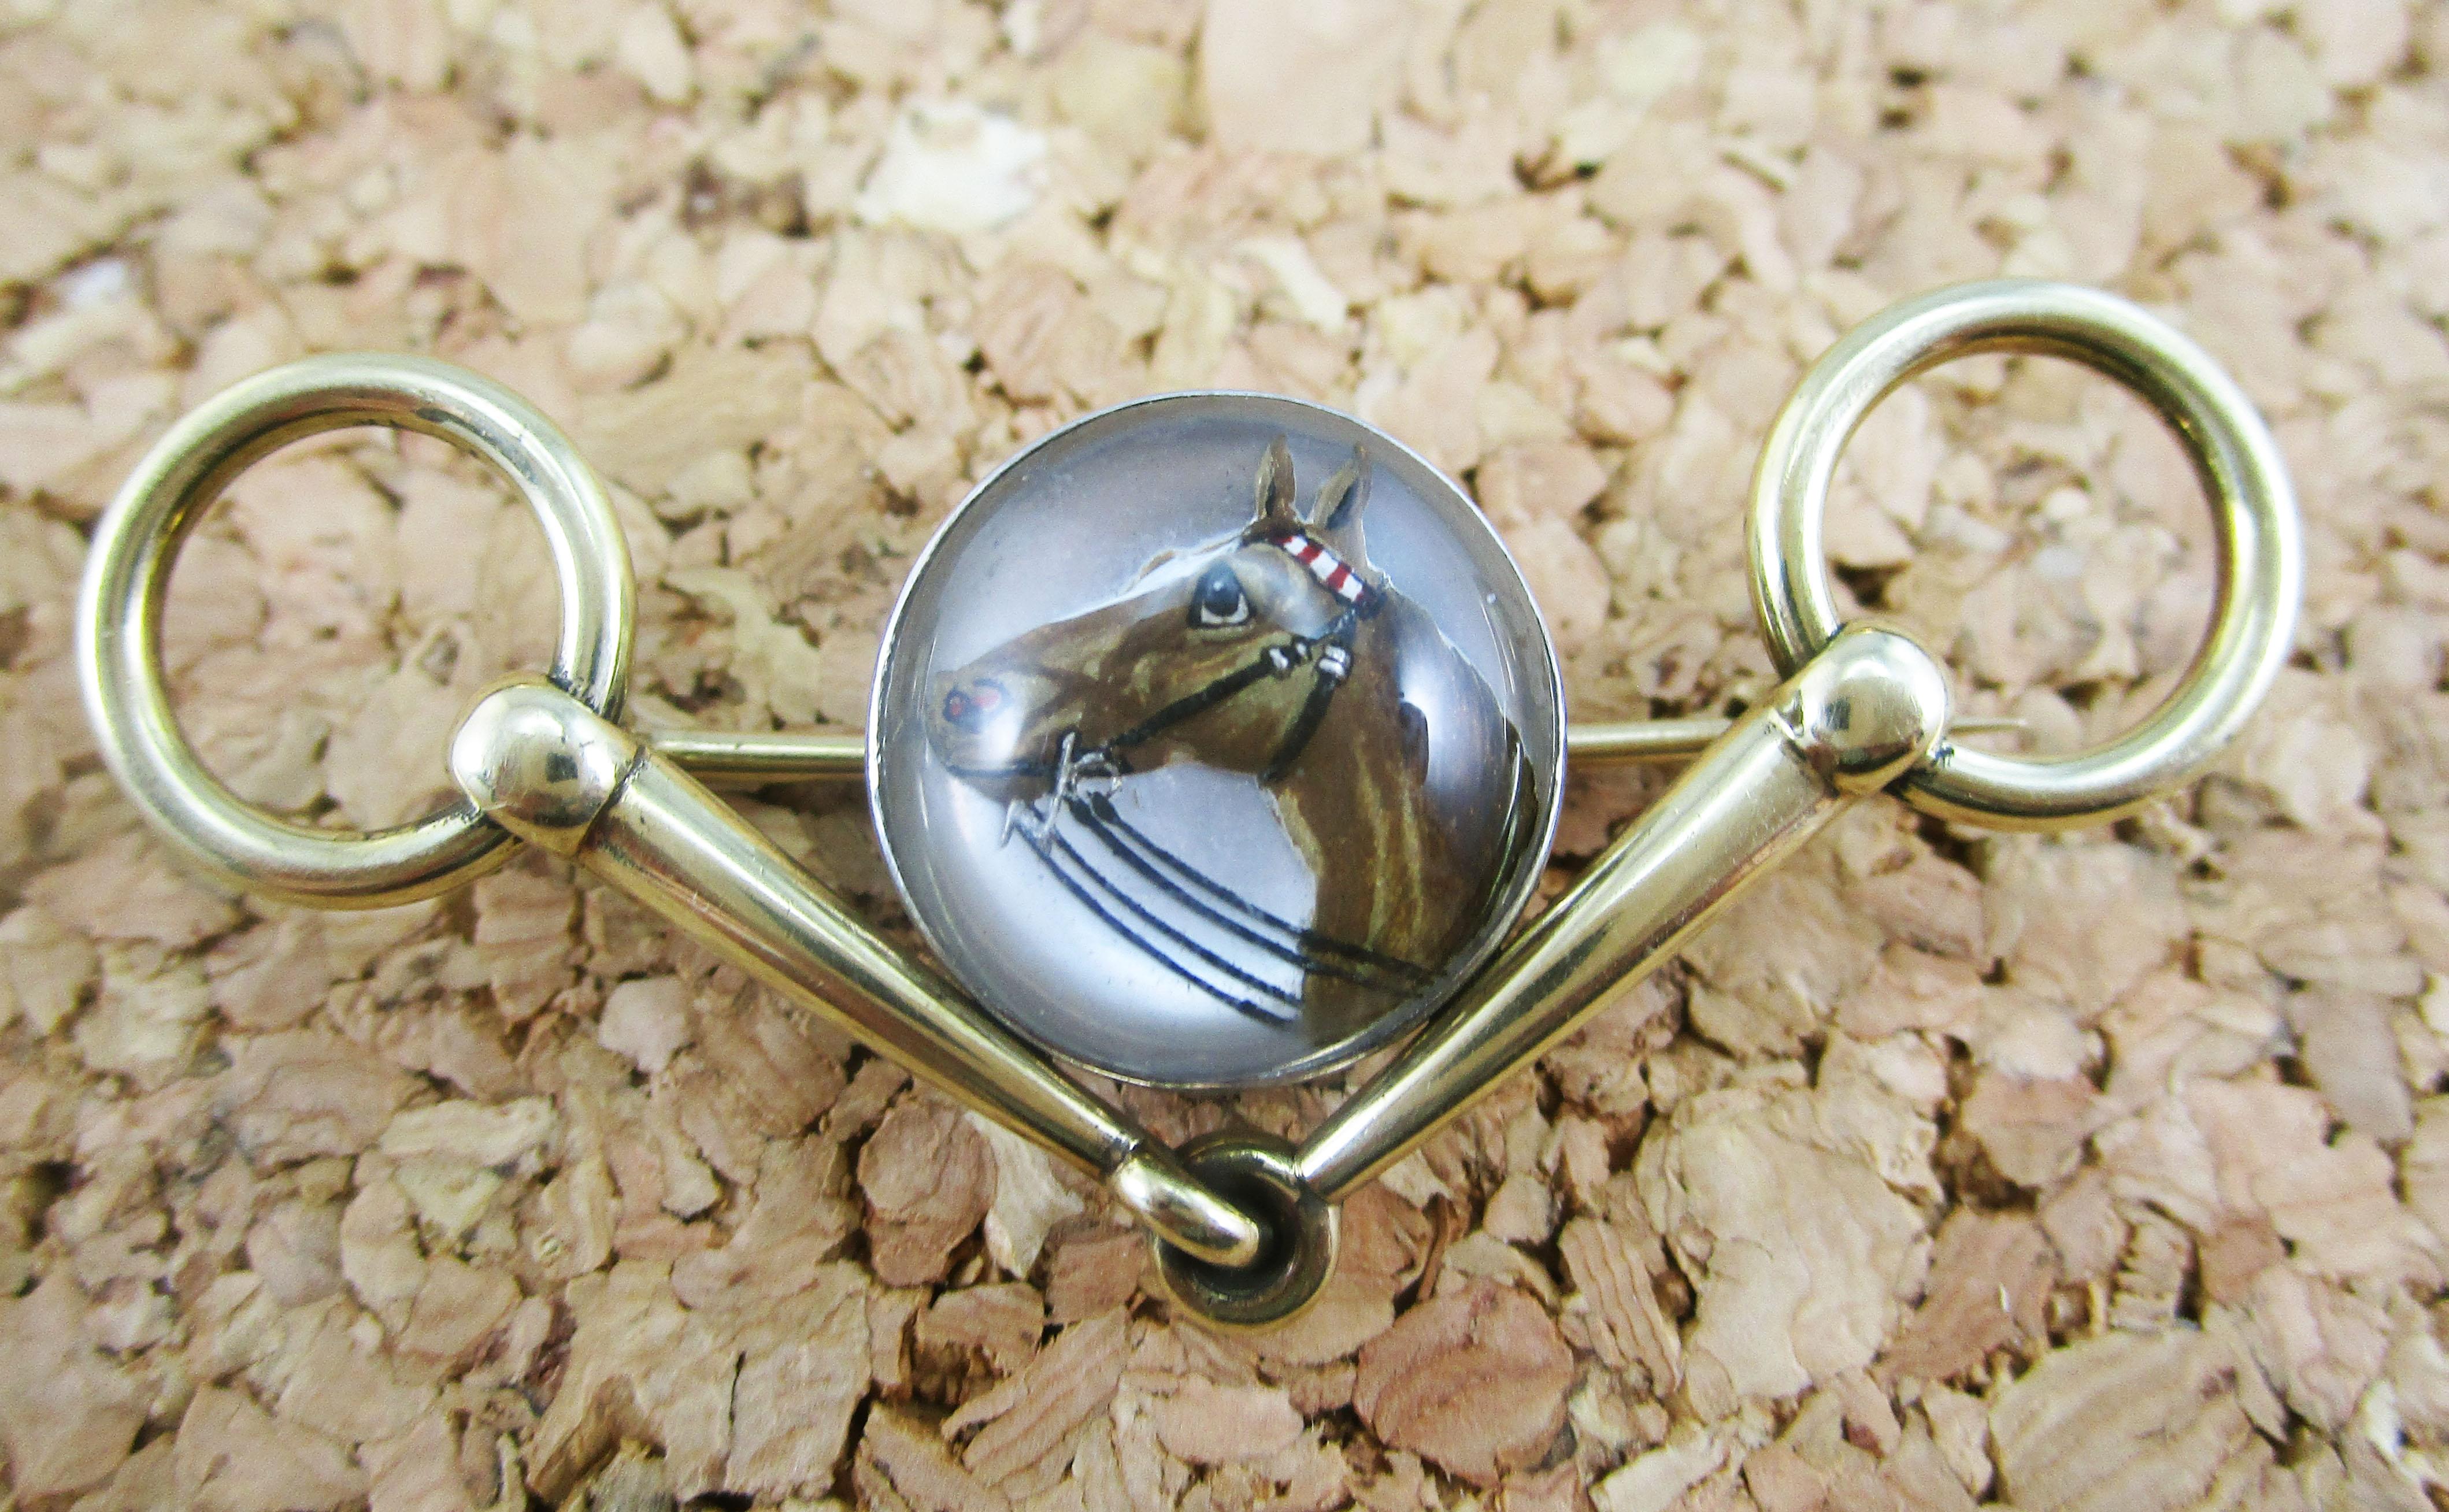 This remarkable Art Deco pin is in 14k yellow gold and features a beautiful hand-painted Essex crystal center in a dramatically angled bridle bit shaped pin. This is the ideal piece of jewelry for the equine enthusiast. Both pin and painting are in